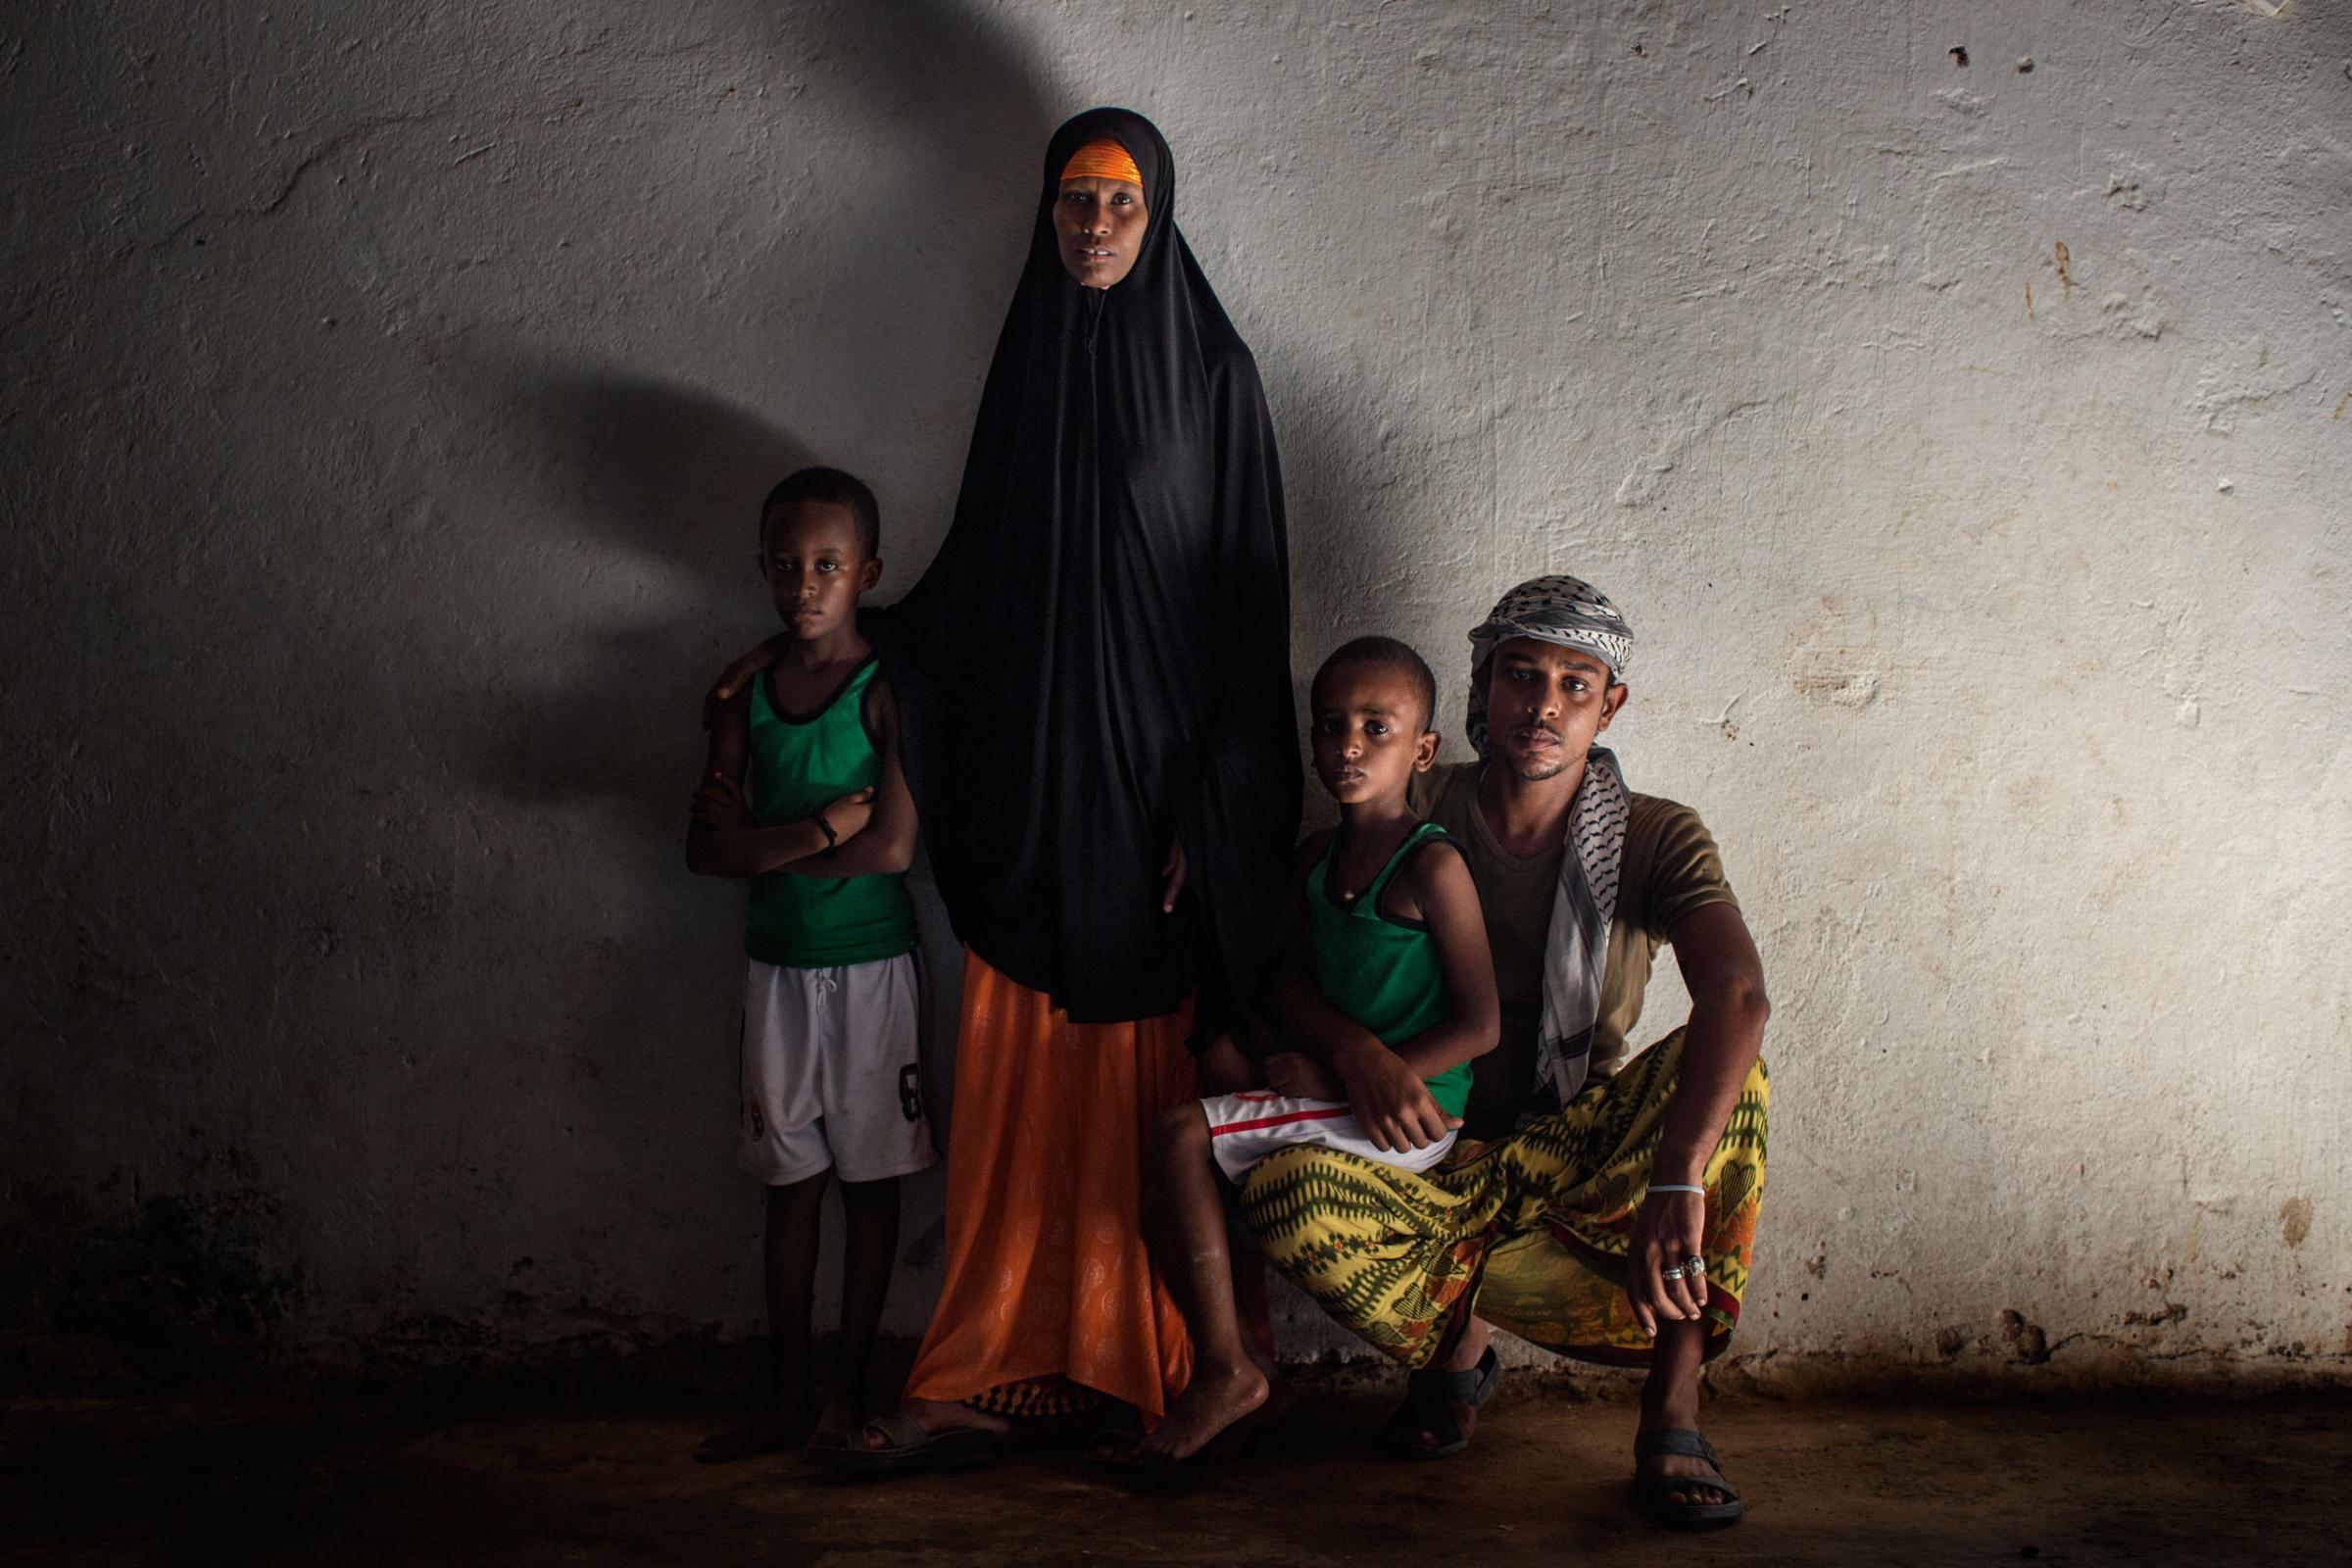 A. Abdalla Ali, a Yemeni refugee from Aden, Yemen, with his wife and their two sons. Abdalla was a house decorator back in his country. He left Yemen with his family when his neighborhood was bombed. Bosaso, Somalia,